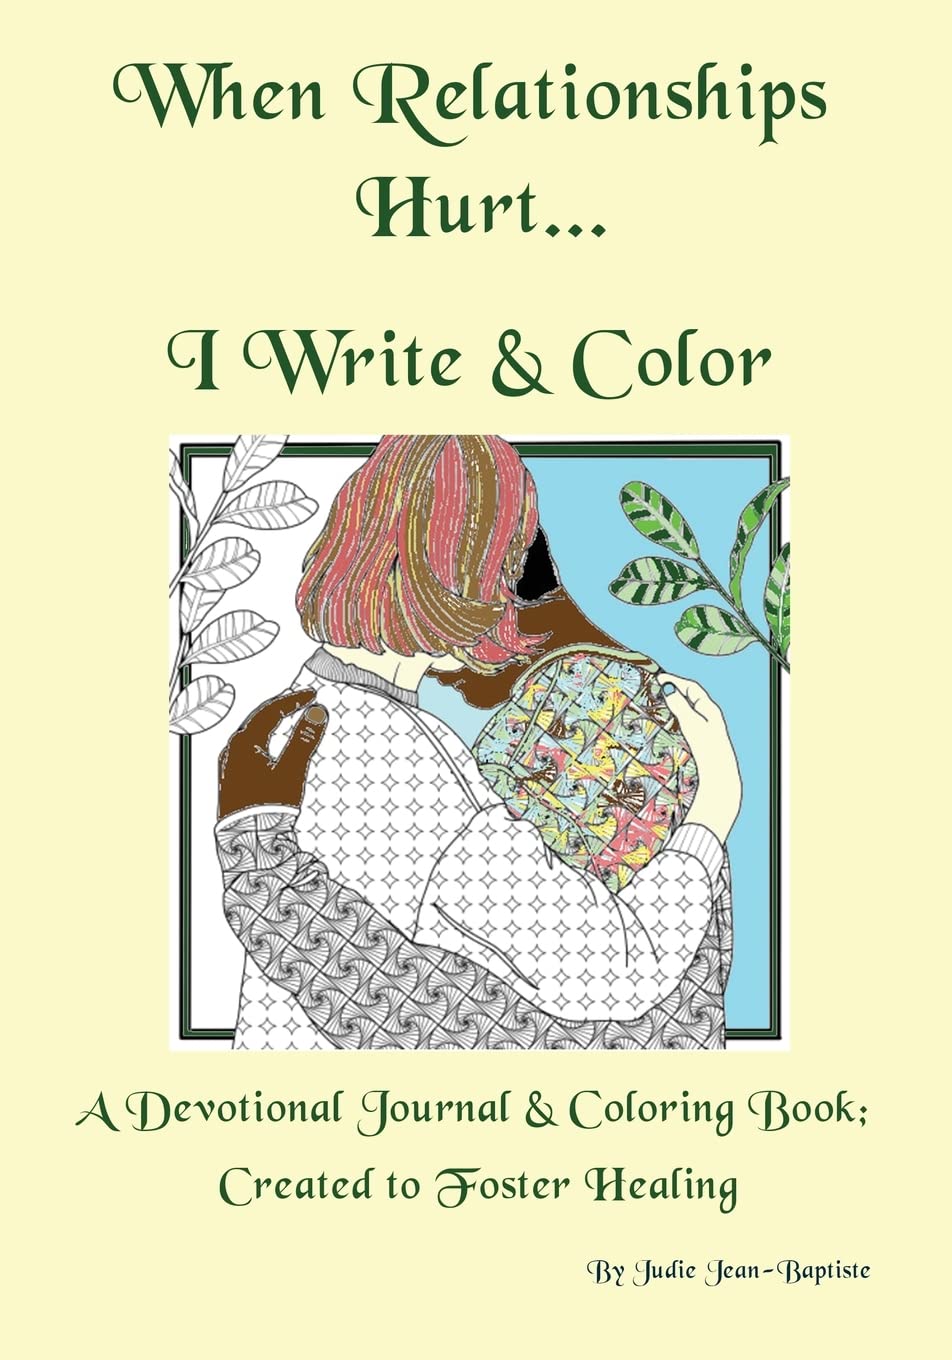 When Relationships Hurt…..I write & color - Cover